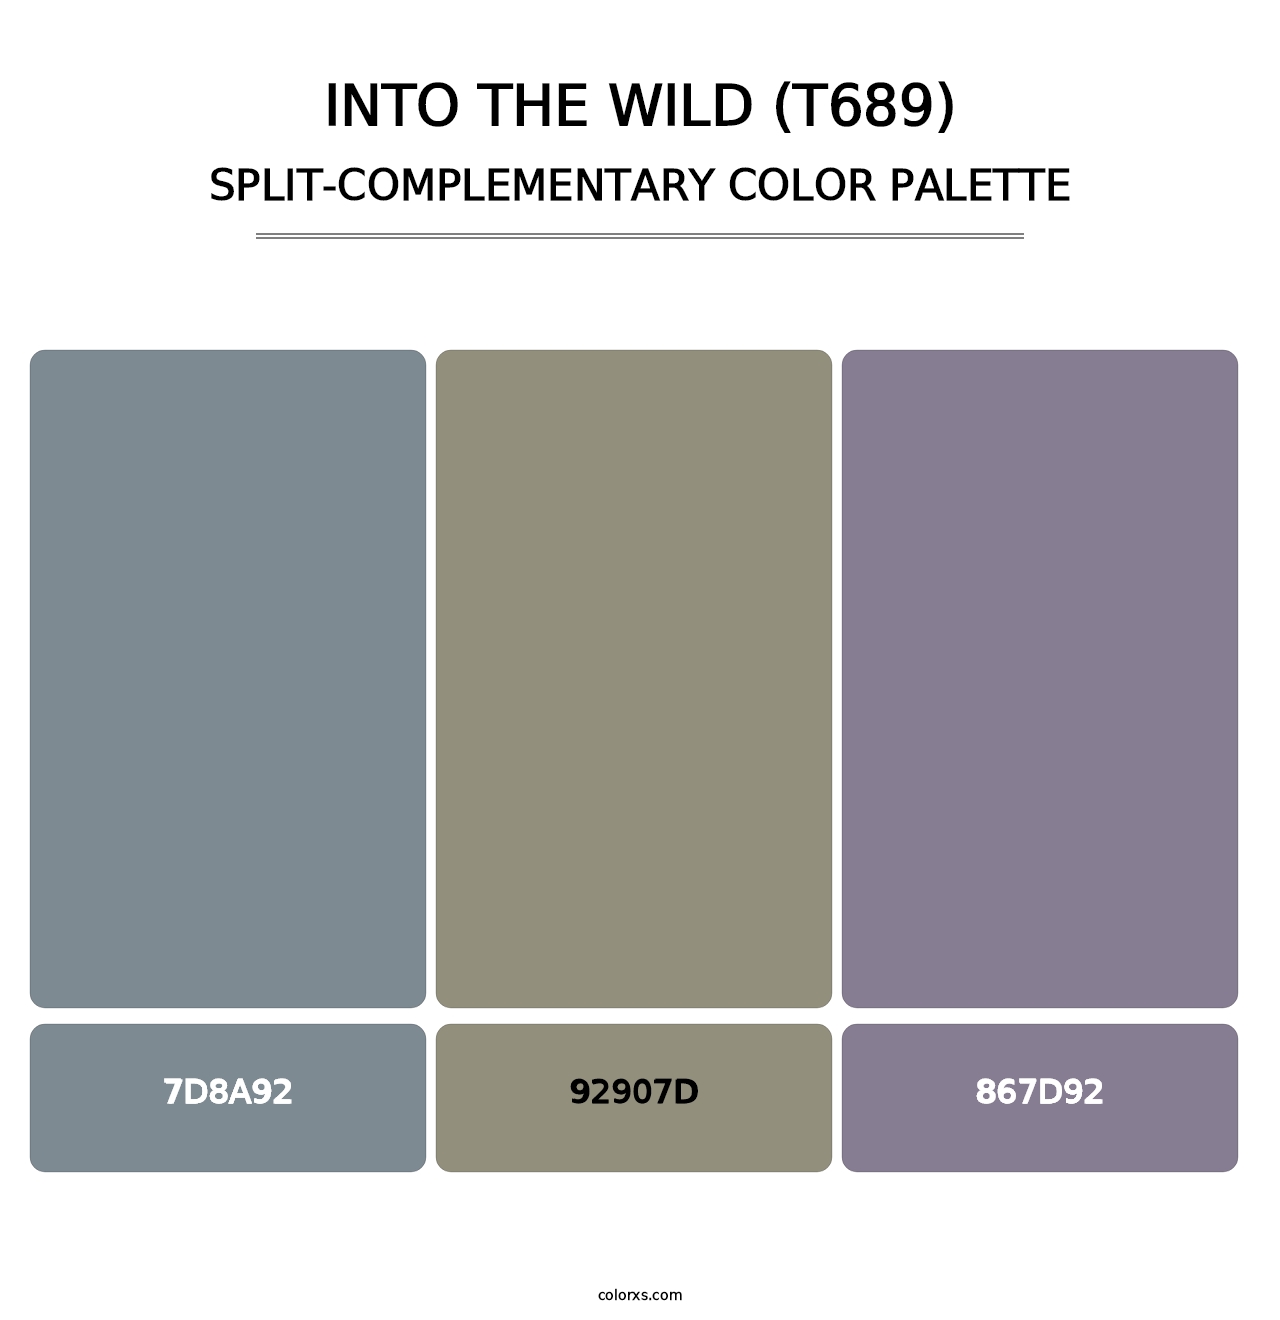 Into the Wild (T689) - Split-Complementary Color Palette